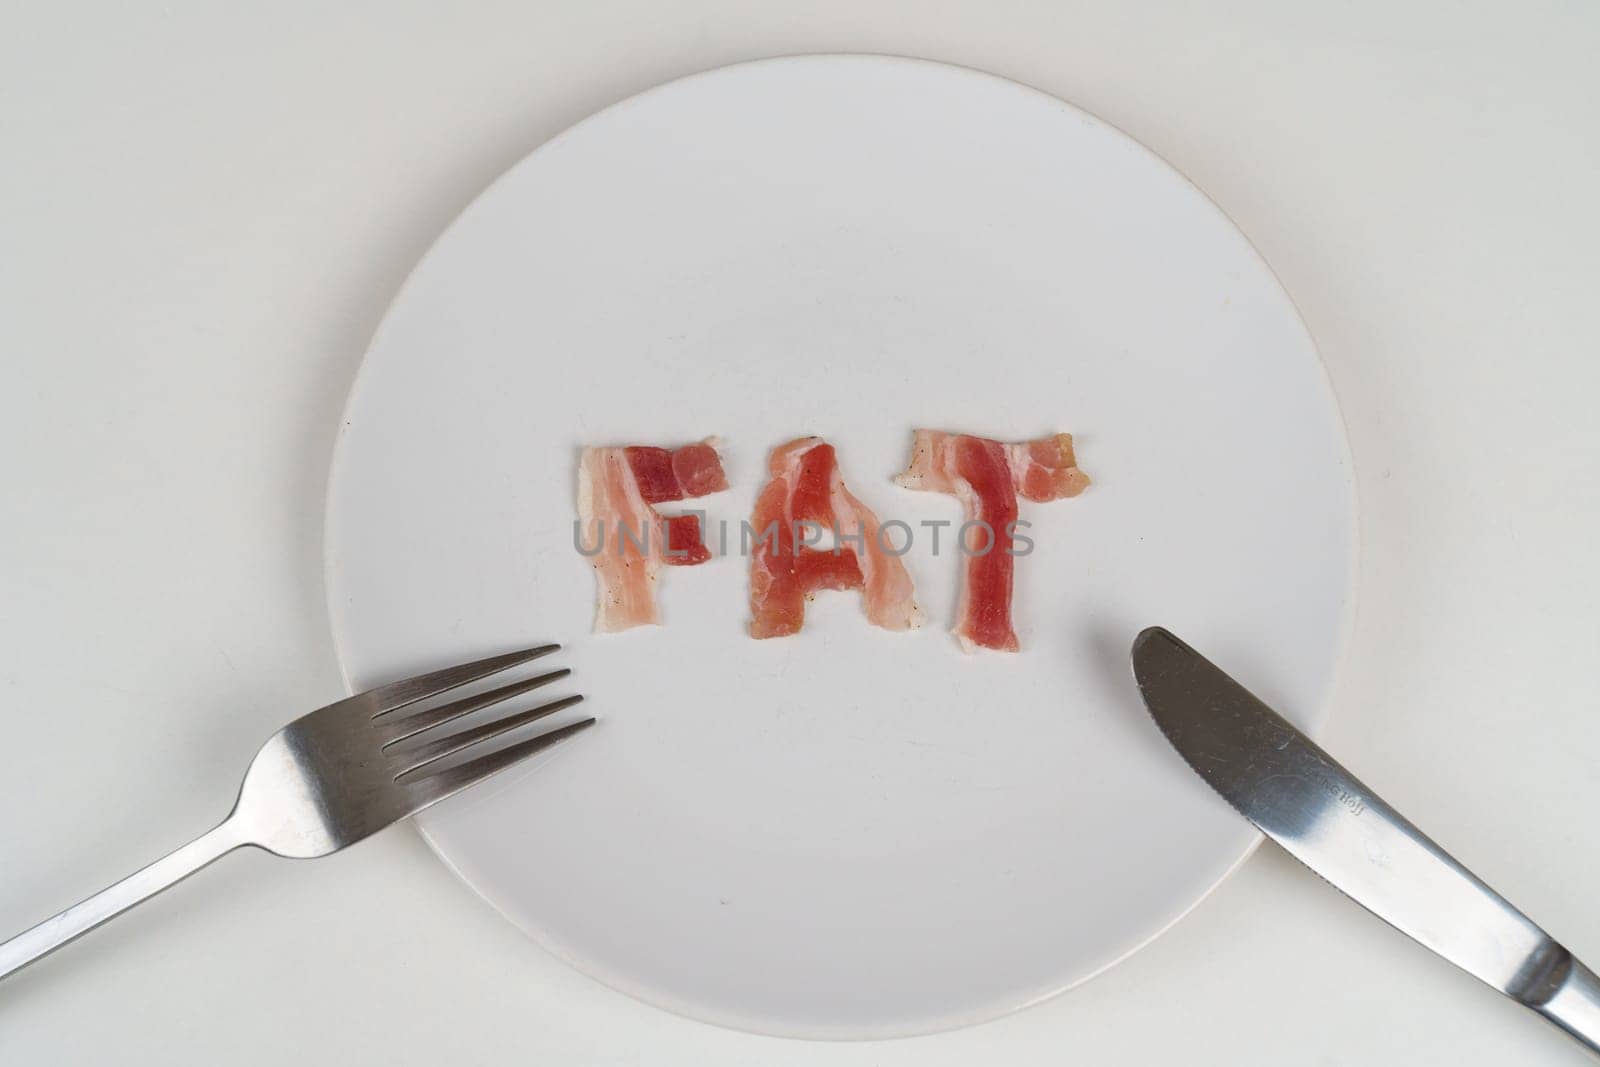 A plate with the word fat on it, accompanied by a fork and knife, symbolizing unhealthy eating habits.